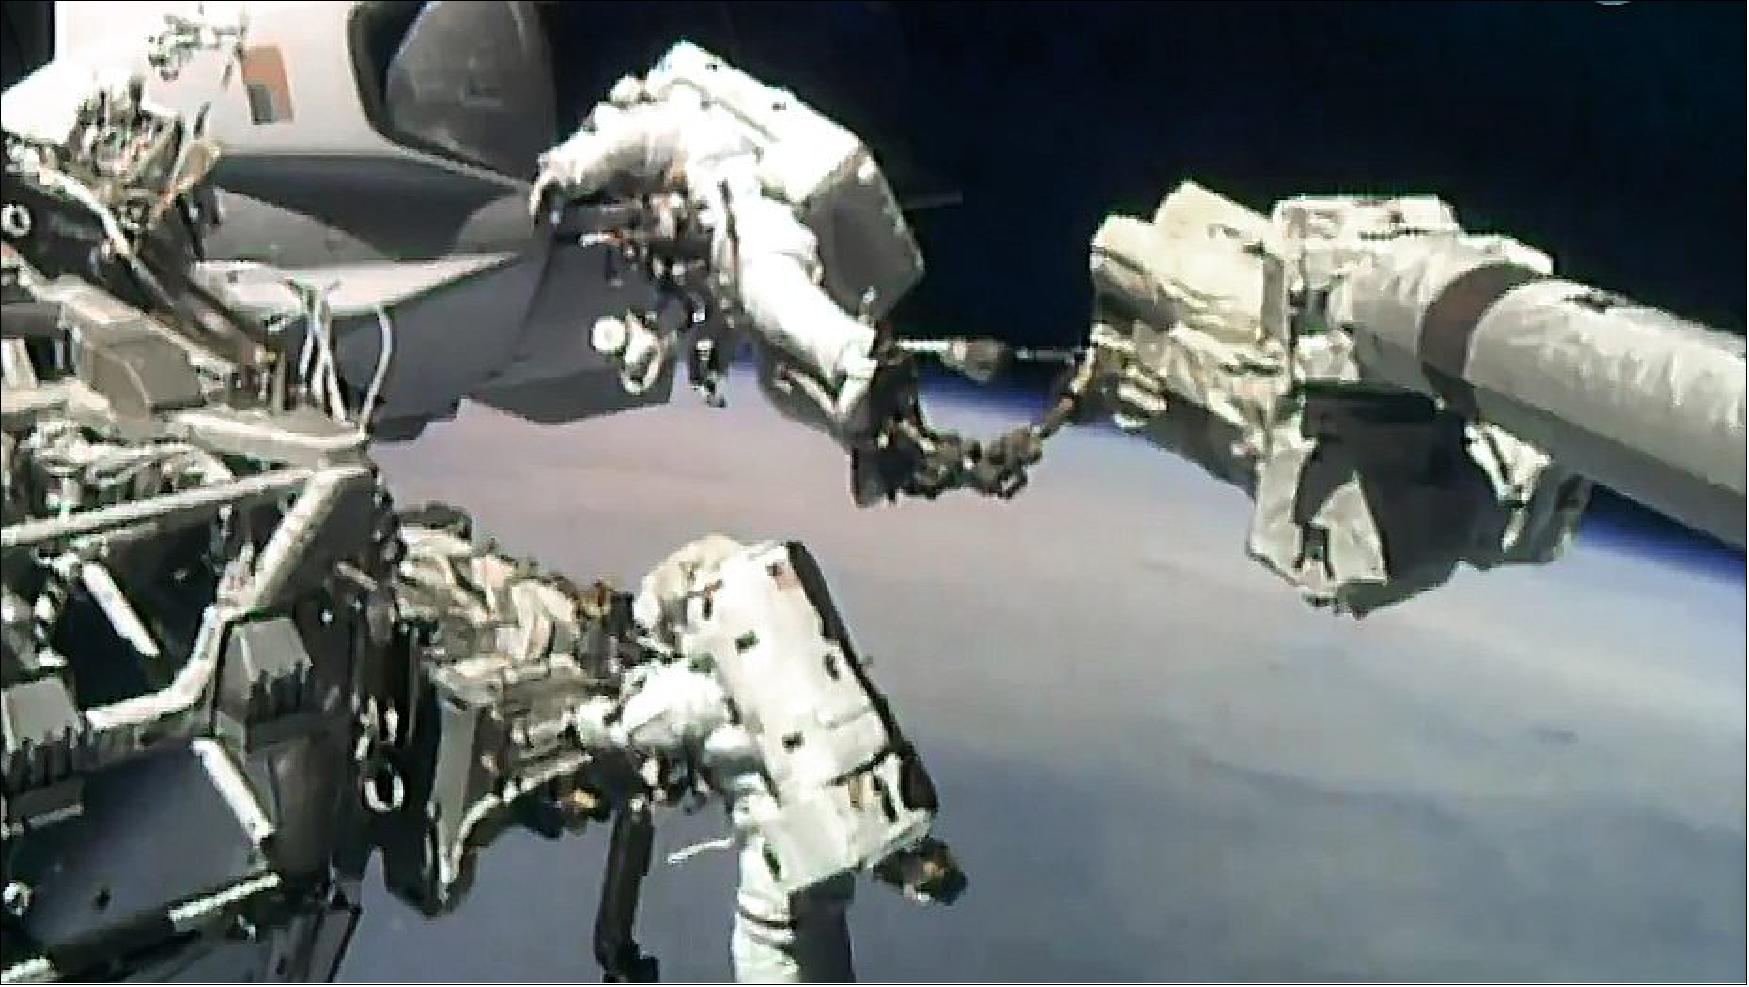 Figure 10: Spacewalkers Victor Glover (top) and Michael Hopkins are pictured working on upgrades to the Bartolomeo science platform attached to Europe’s Columbus lab module (image credit: NASA TV)